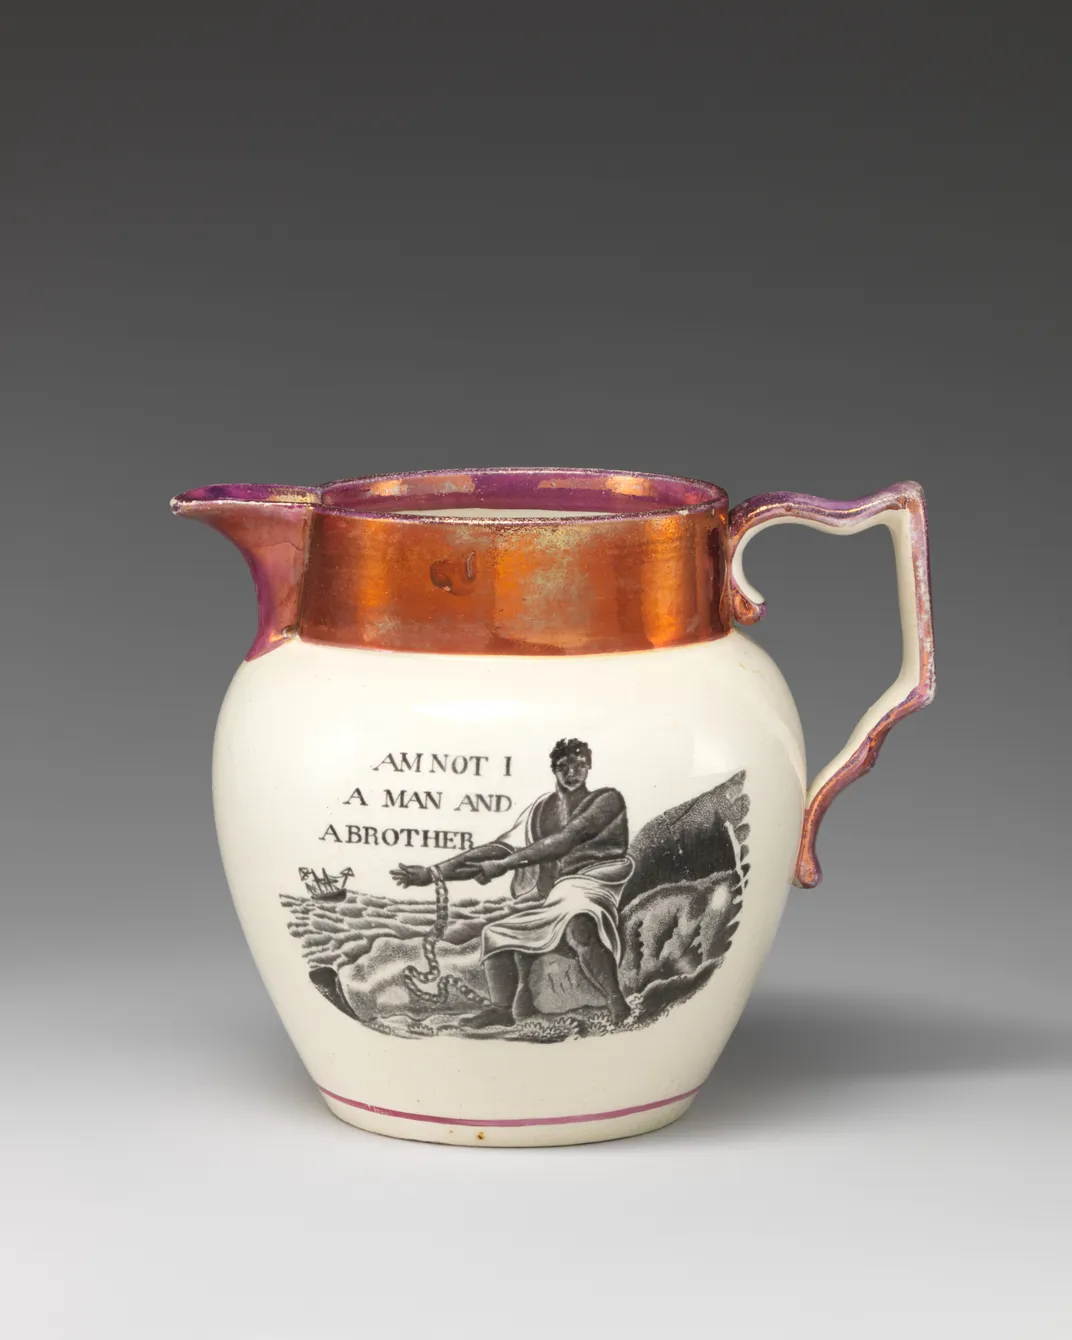 A white jug with pinky-orange copper trim, with a black engraving that depicts an enslaved kneeling man holding his outstretched bound wrists